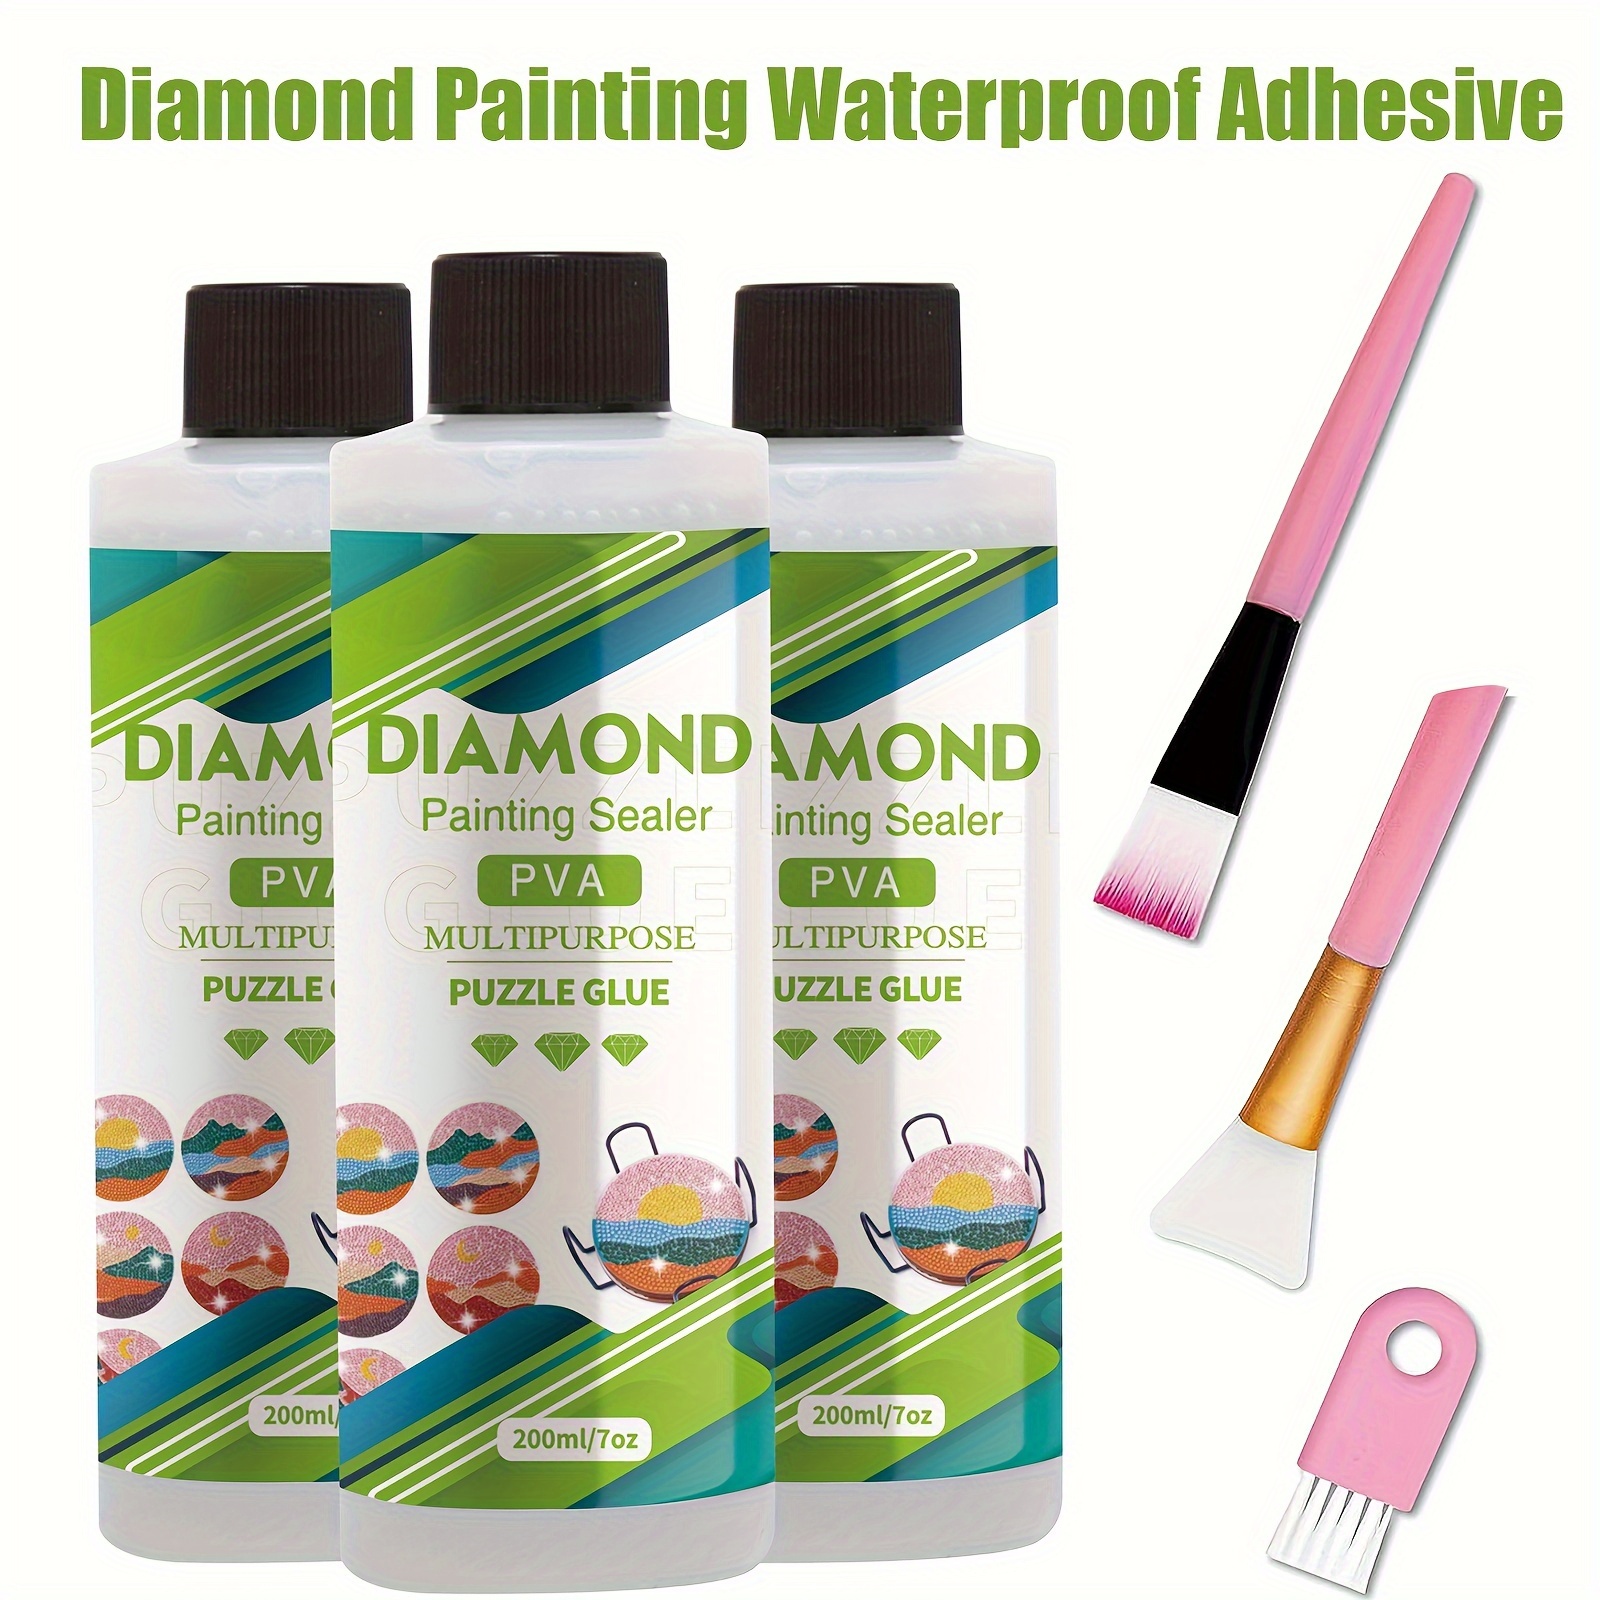  Diamond Painting Sealer, 4 OZ 120ML Permanent Hold &  Transparent Sealer for Diamond Painting and Puzzle Glue, DIY Fixing &  Sealing Painting Accessories : Arts, Crafts & Sewing